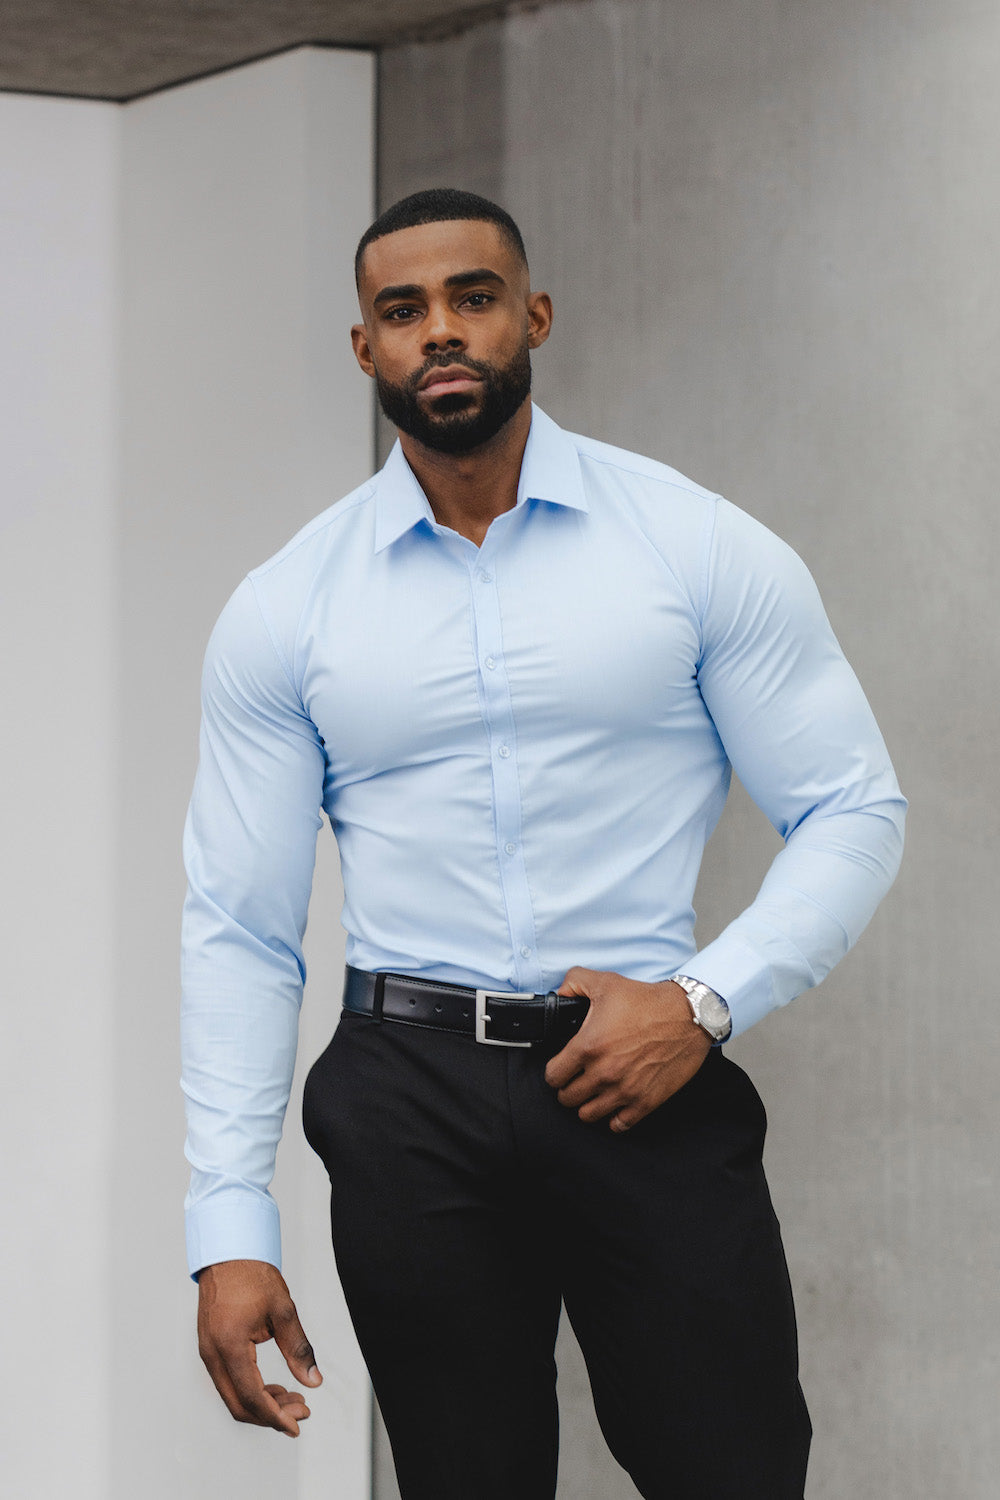 athletic fit dress shirts